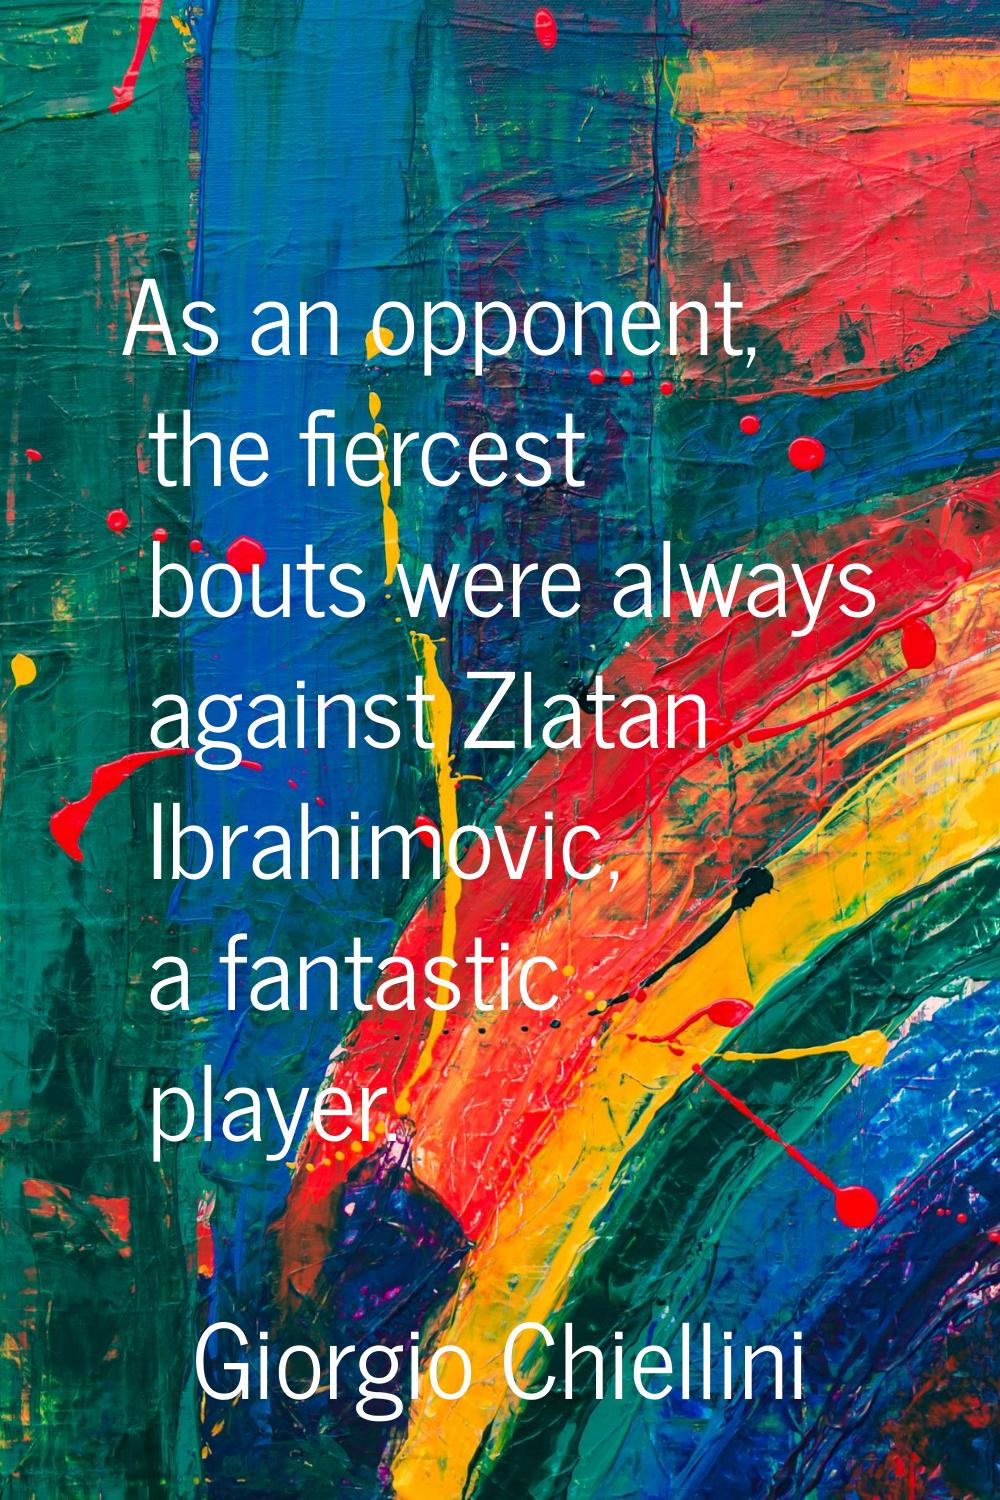 As an opponent, the fiercest bouts were always against Zlatan Ibrahimovic, a fantastic player.